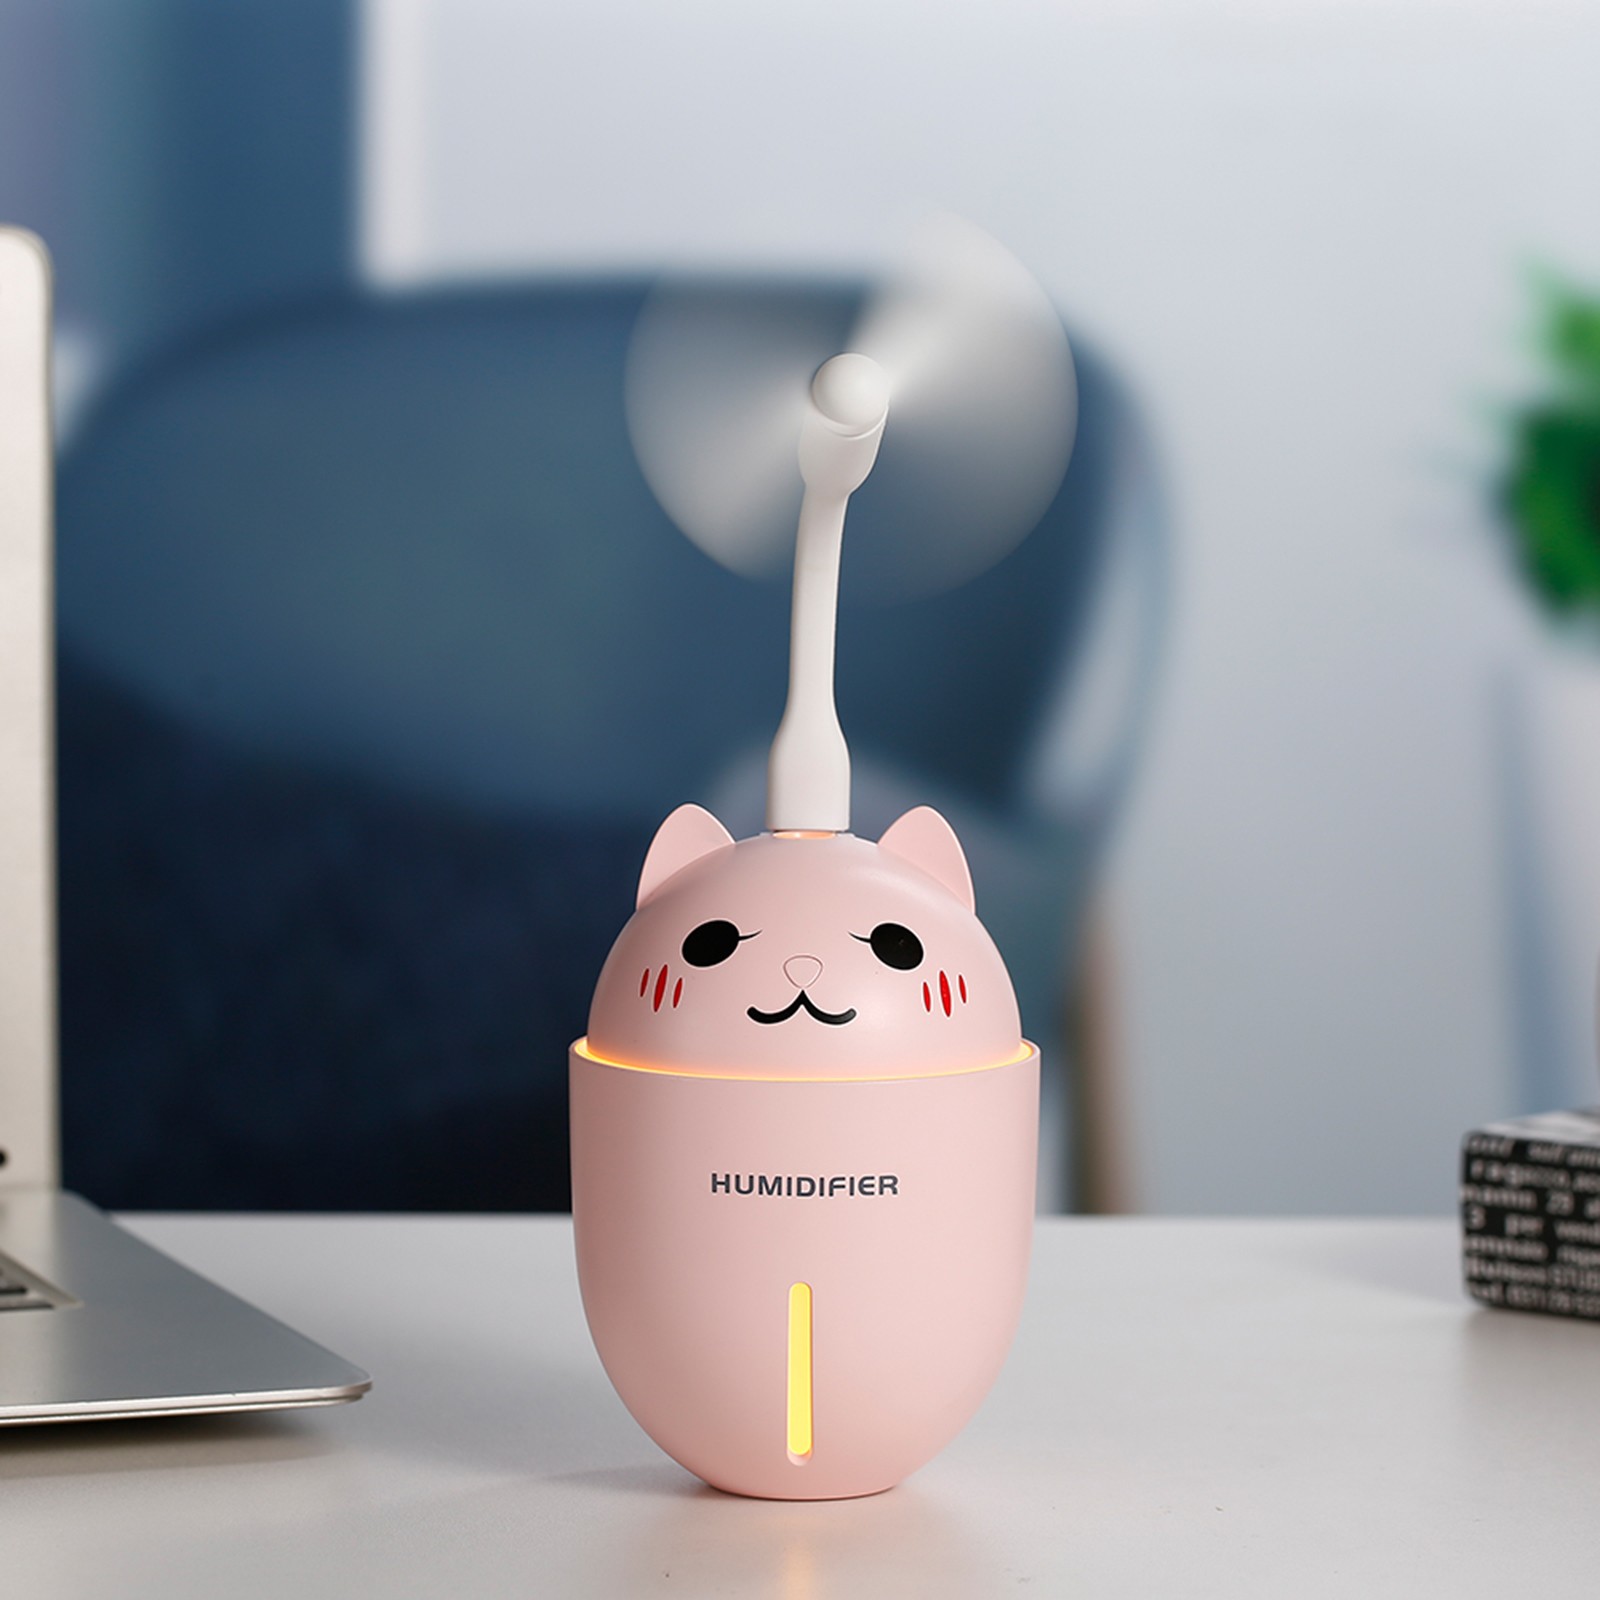 3 In 1 Air Purifier Usb Mini Air Humidifier Ultrasonic Aroma Essential Oil Diffuser 320ml Aromatherapy Humidifier Mist Maker